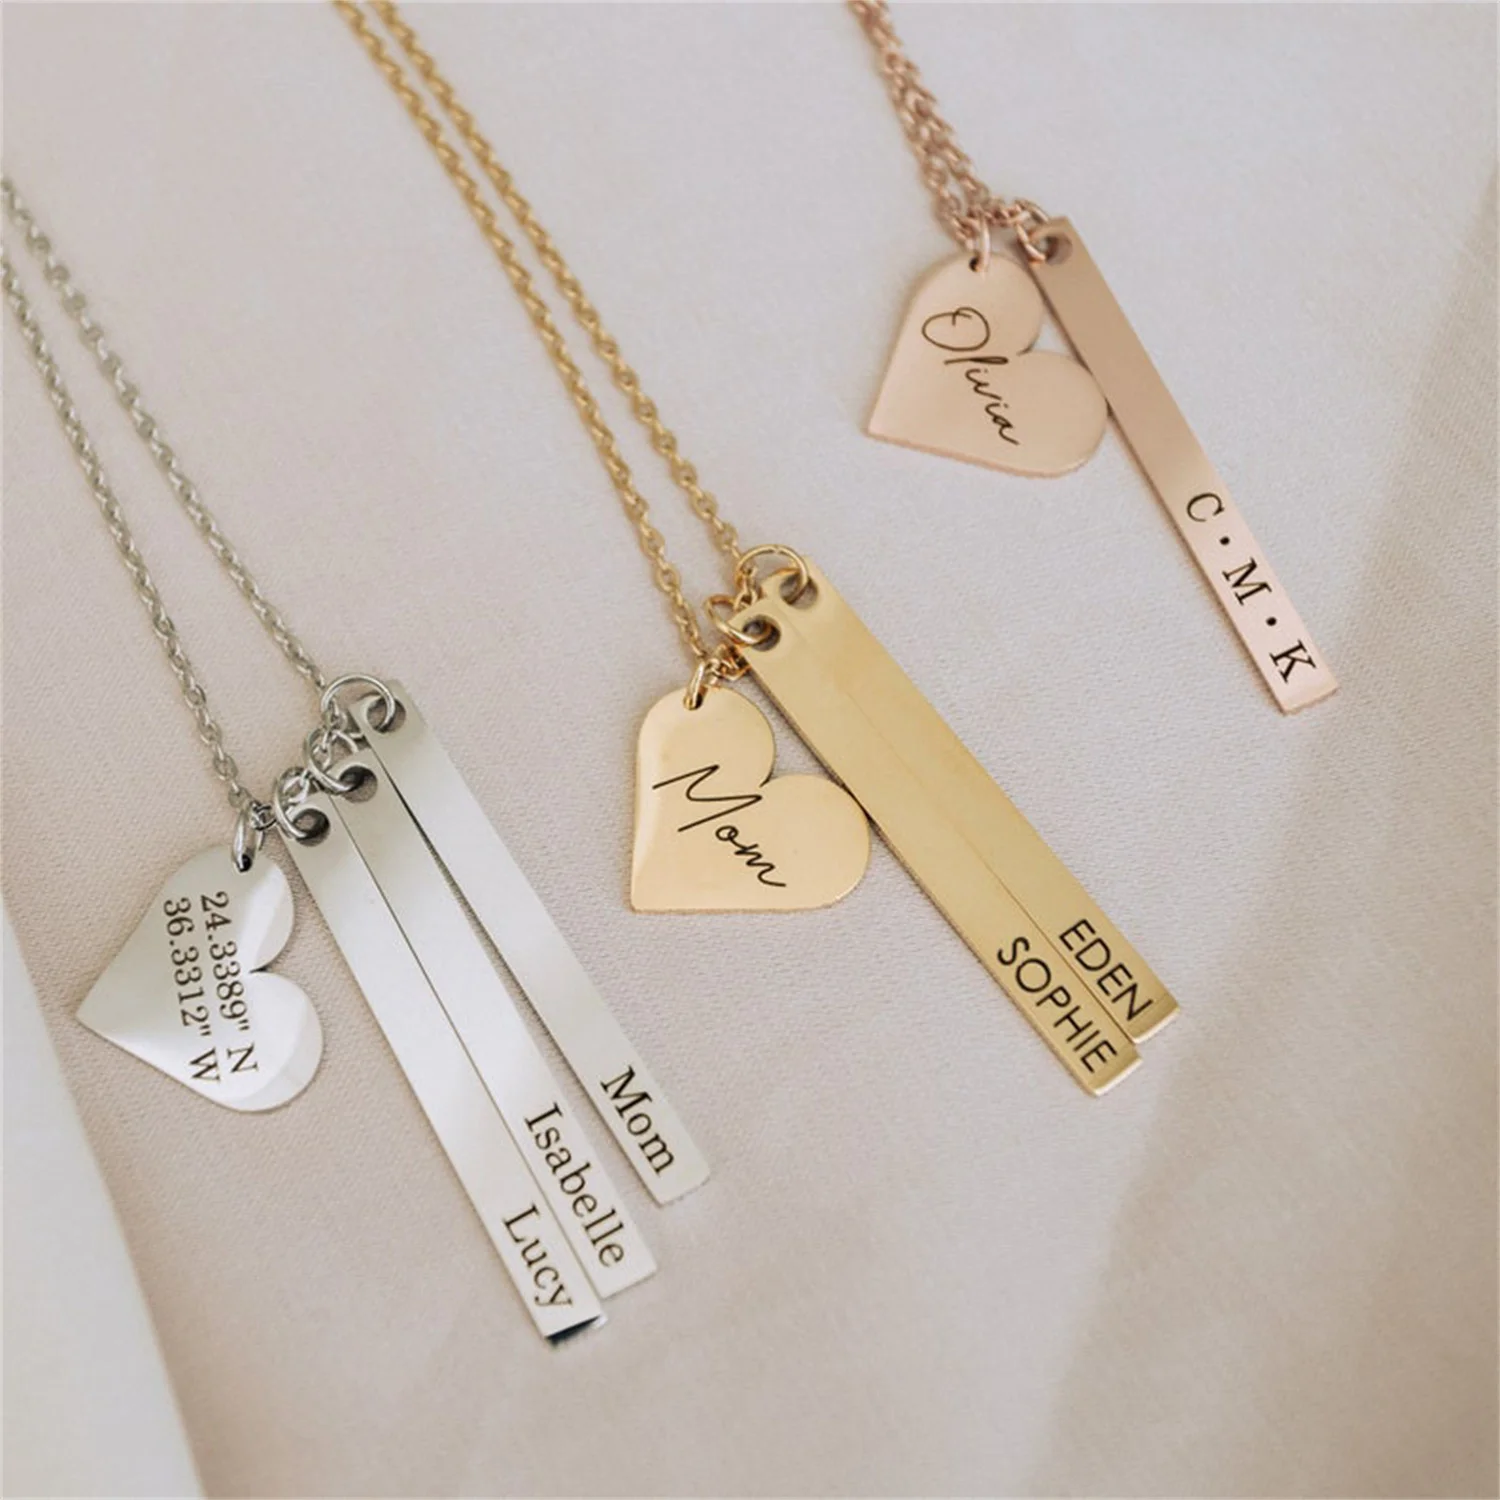 Personalized Engraved Name Bar Necklace Custom Heart Gold Charm Pendant Stainless Steel Jewelry Exquisite Gift For Family Friend bedroom diffuser electric humidifier gift for family friend new dropship